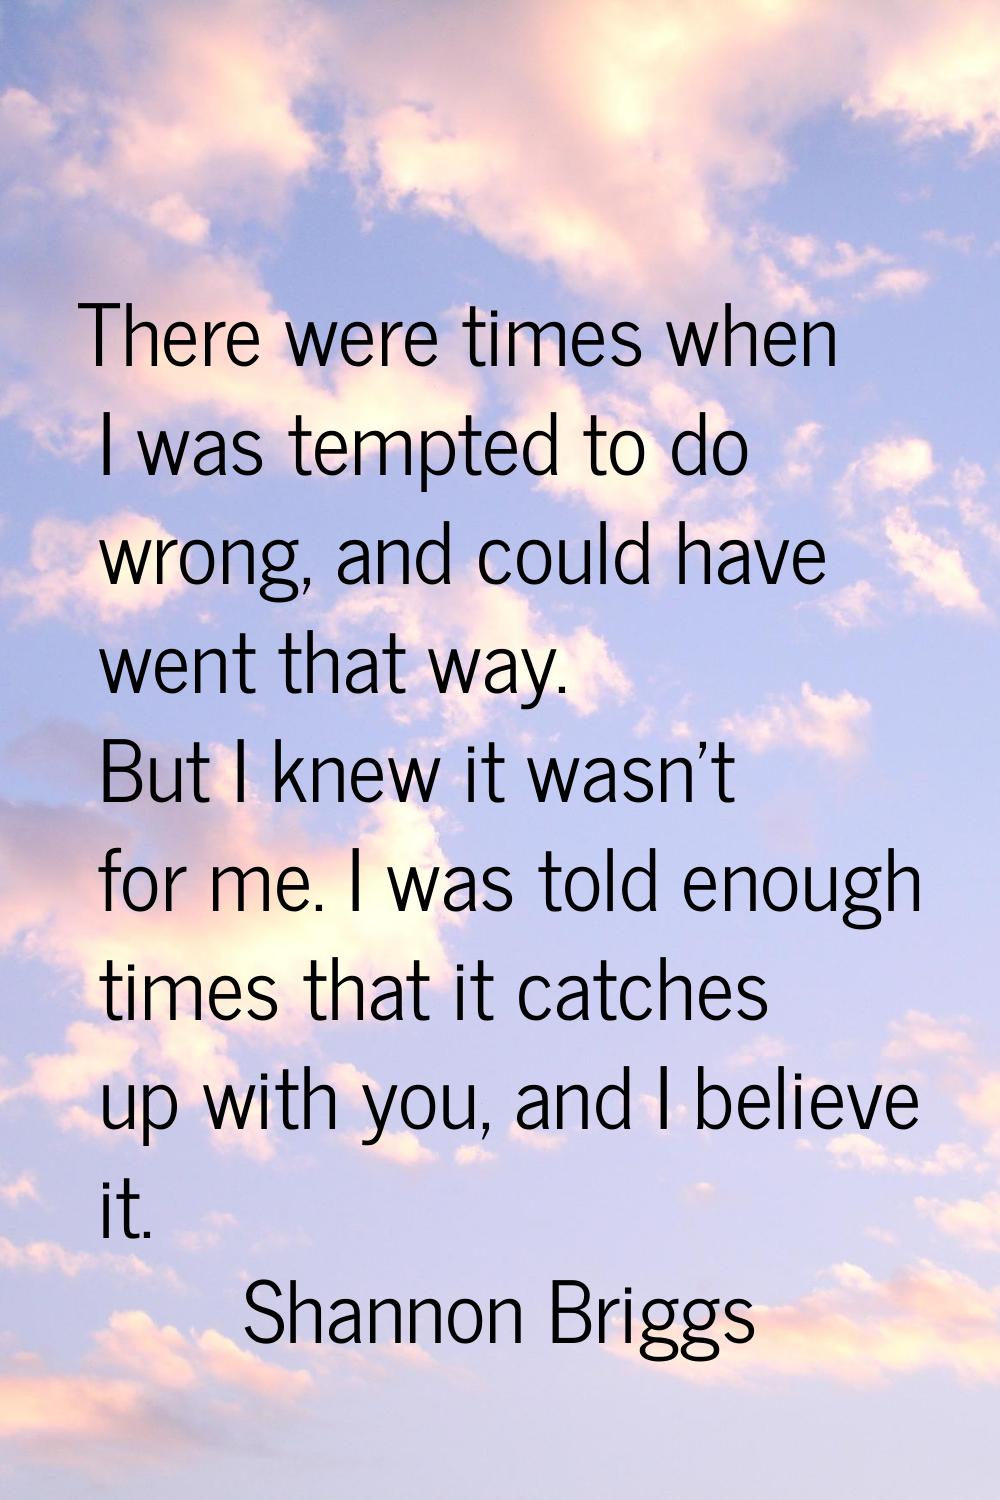 There were times when I was tempted to do wrong, and could have went that way. But I knew it wasn't